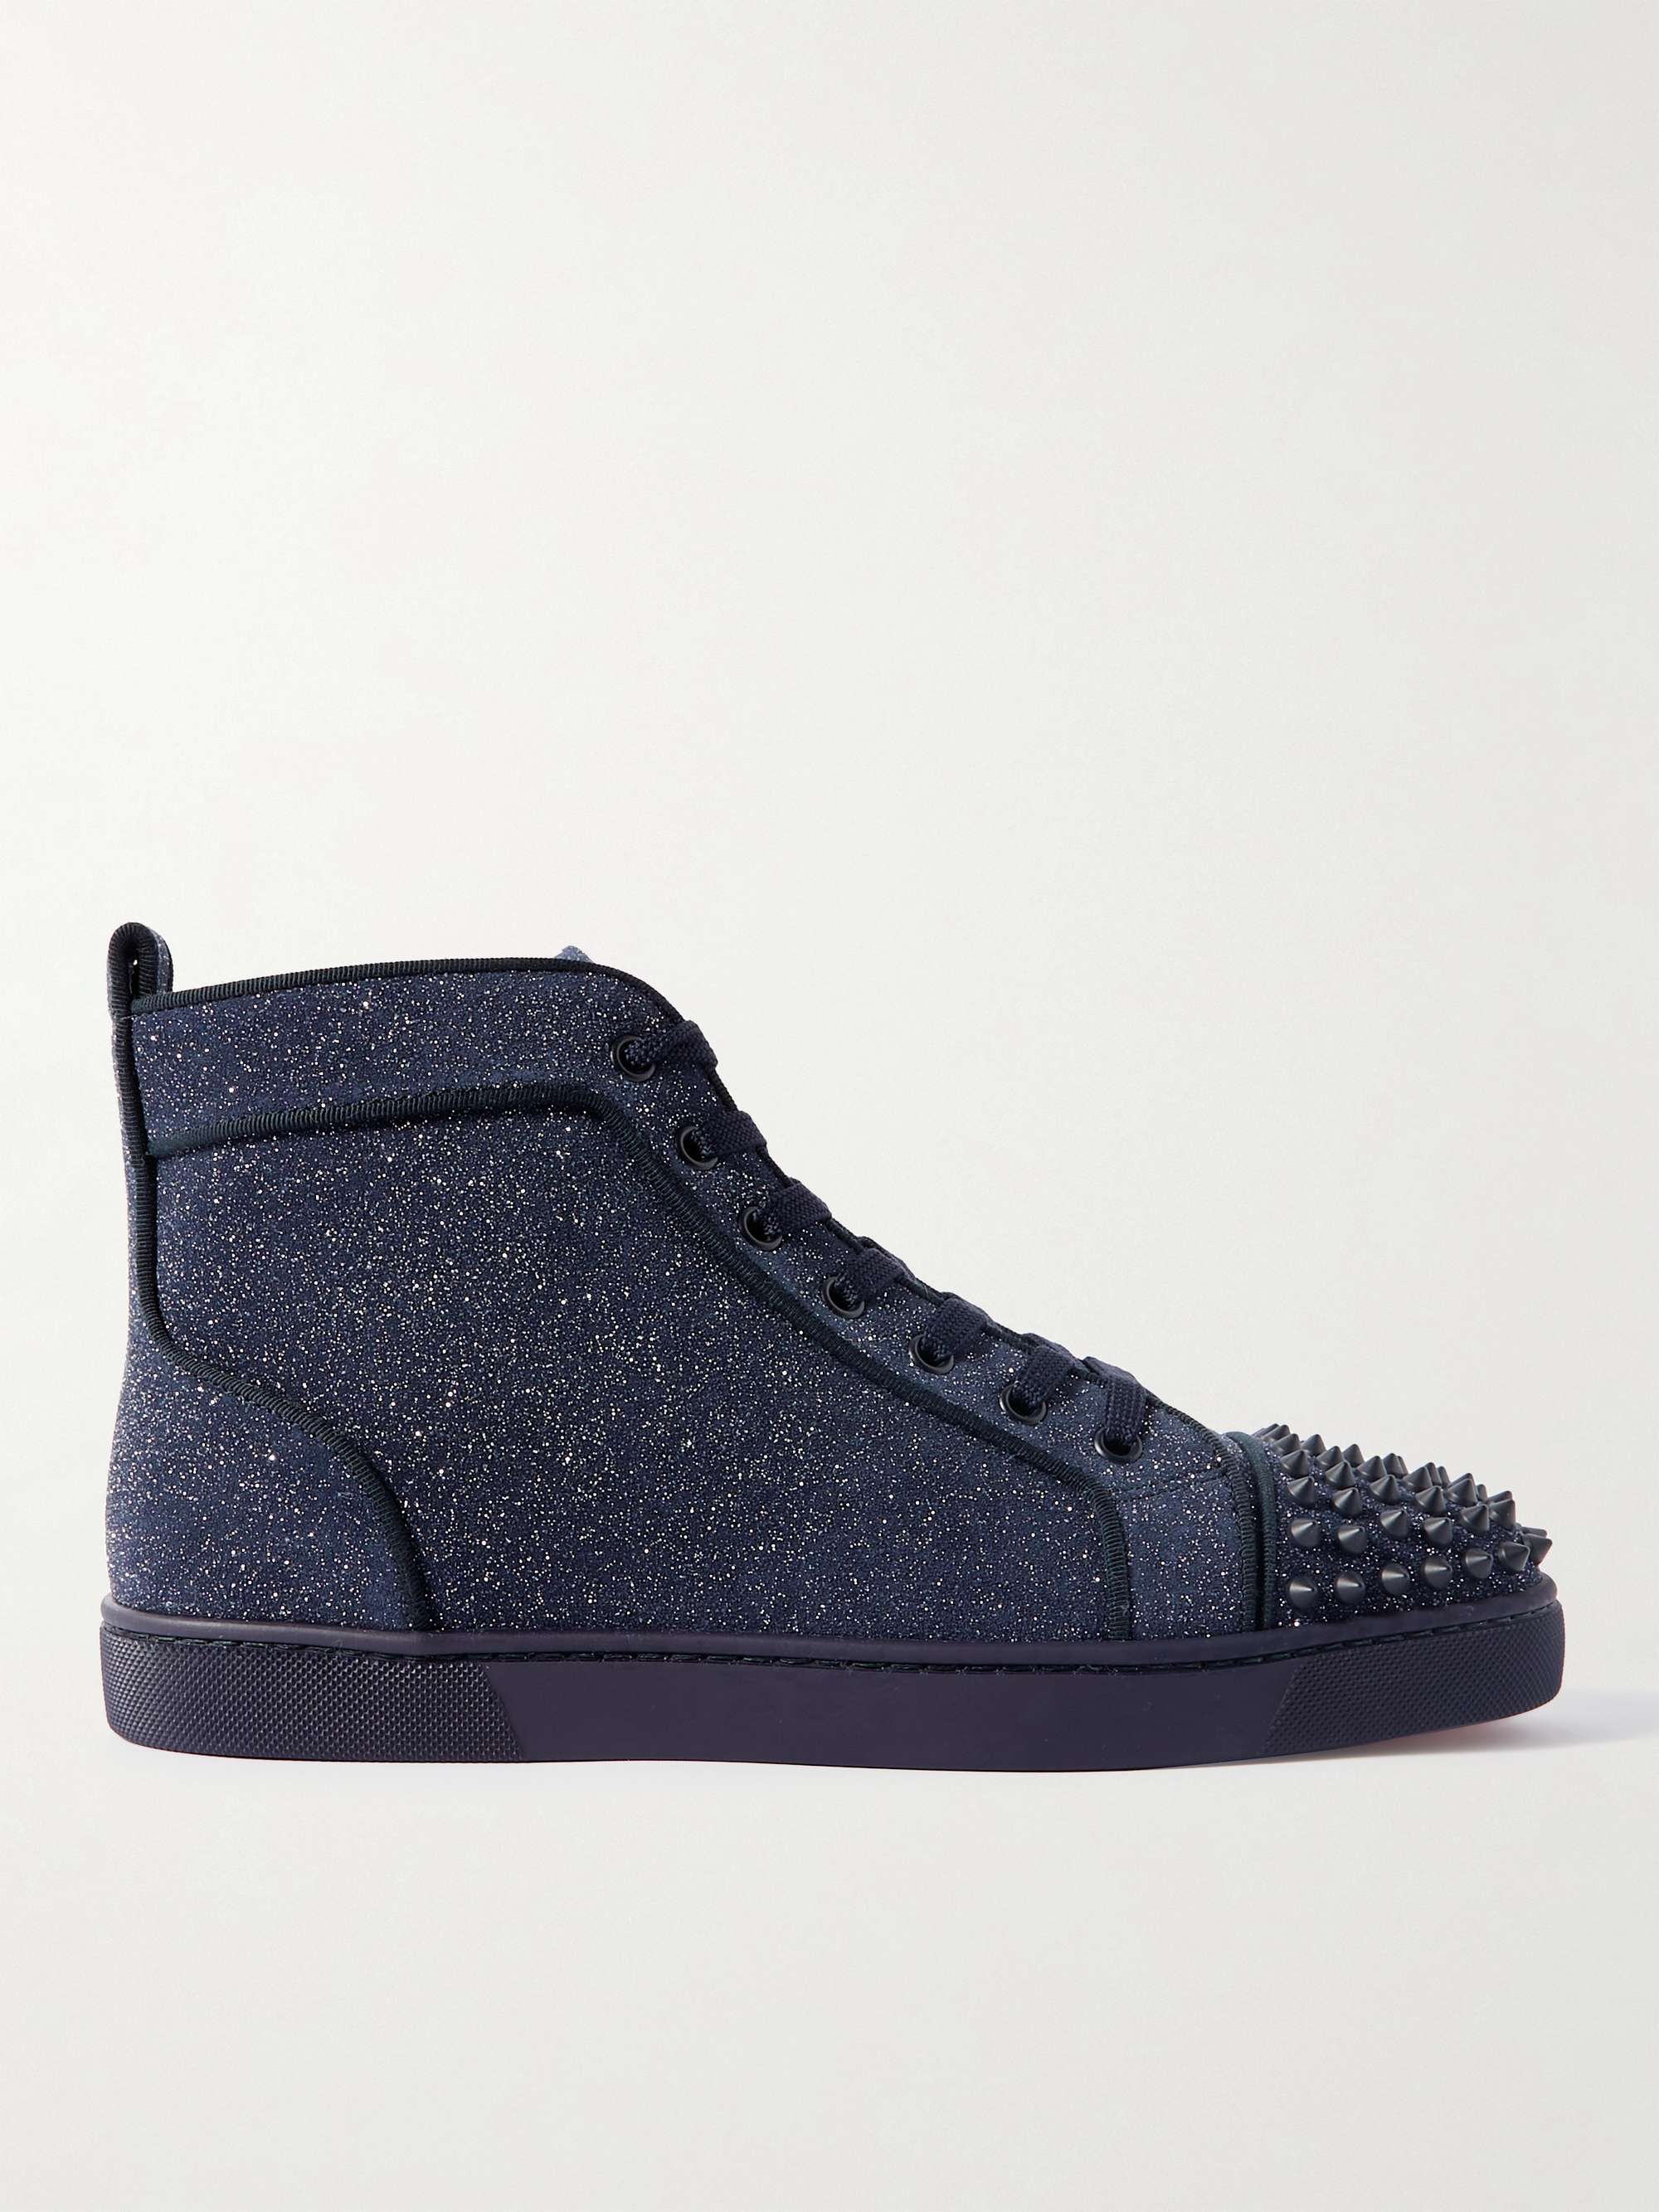 CHRISTIAN LOUBOUTIN Louis Spiked Glitter Suede-Trimmed Leather High-Top  Sneakers | MR PORTER